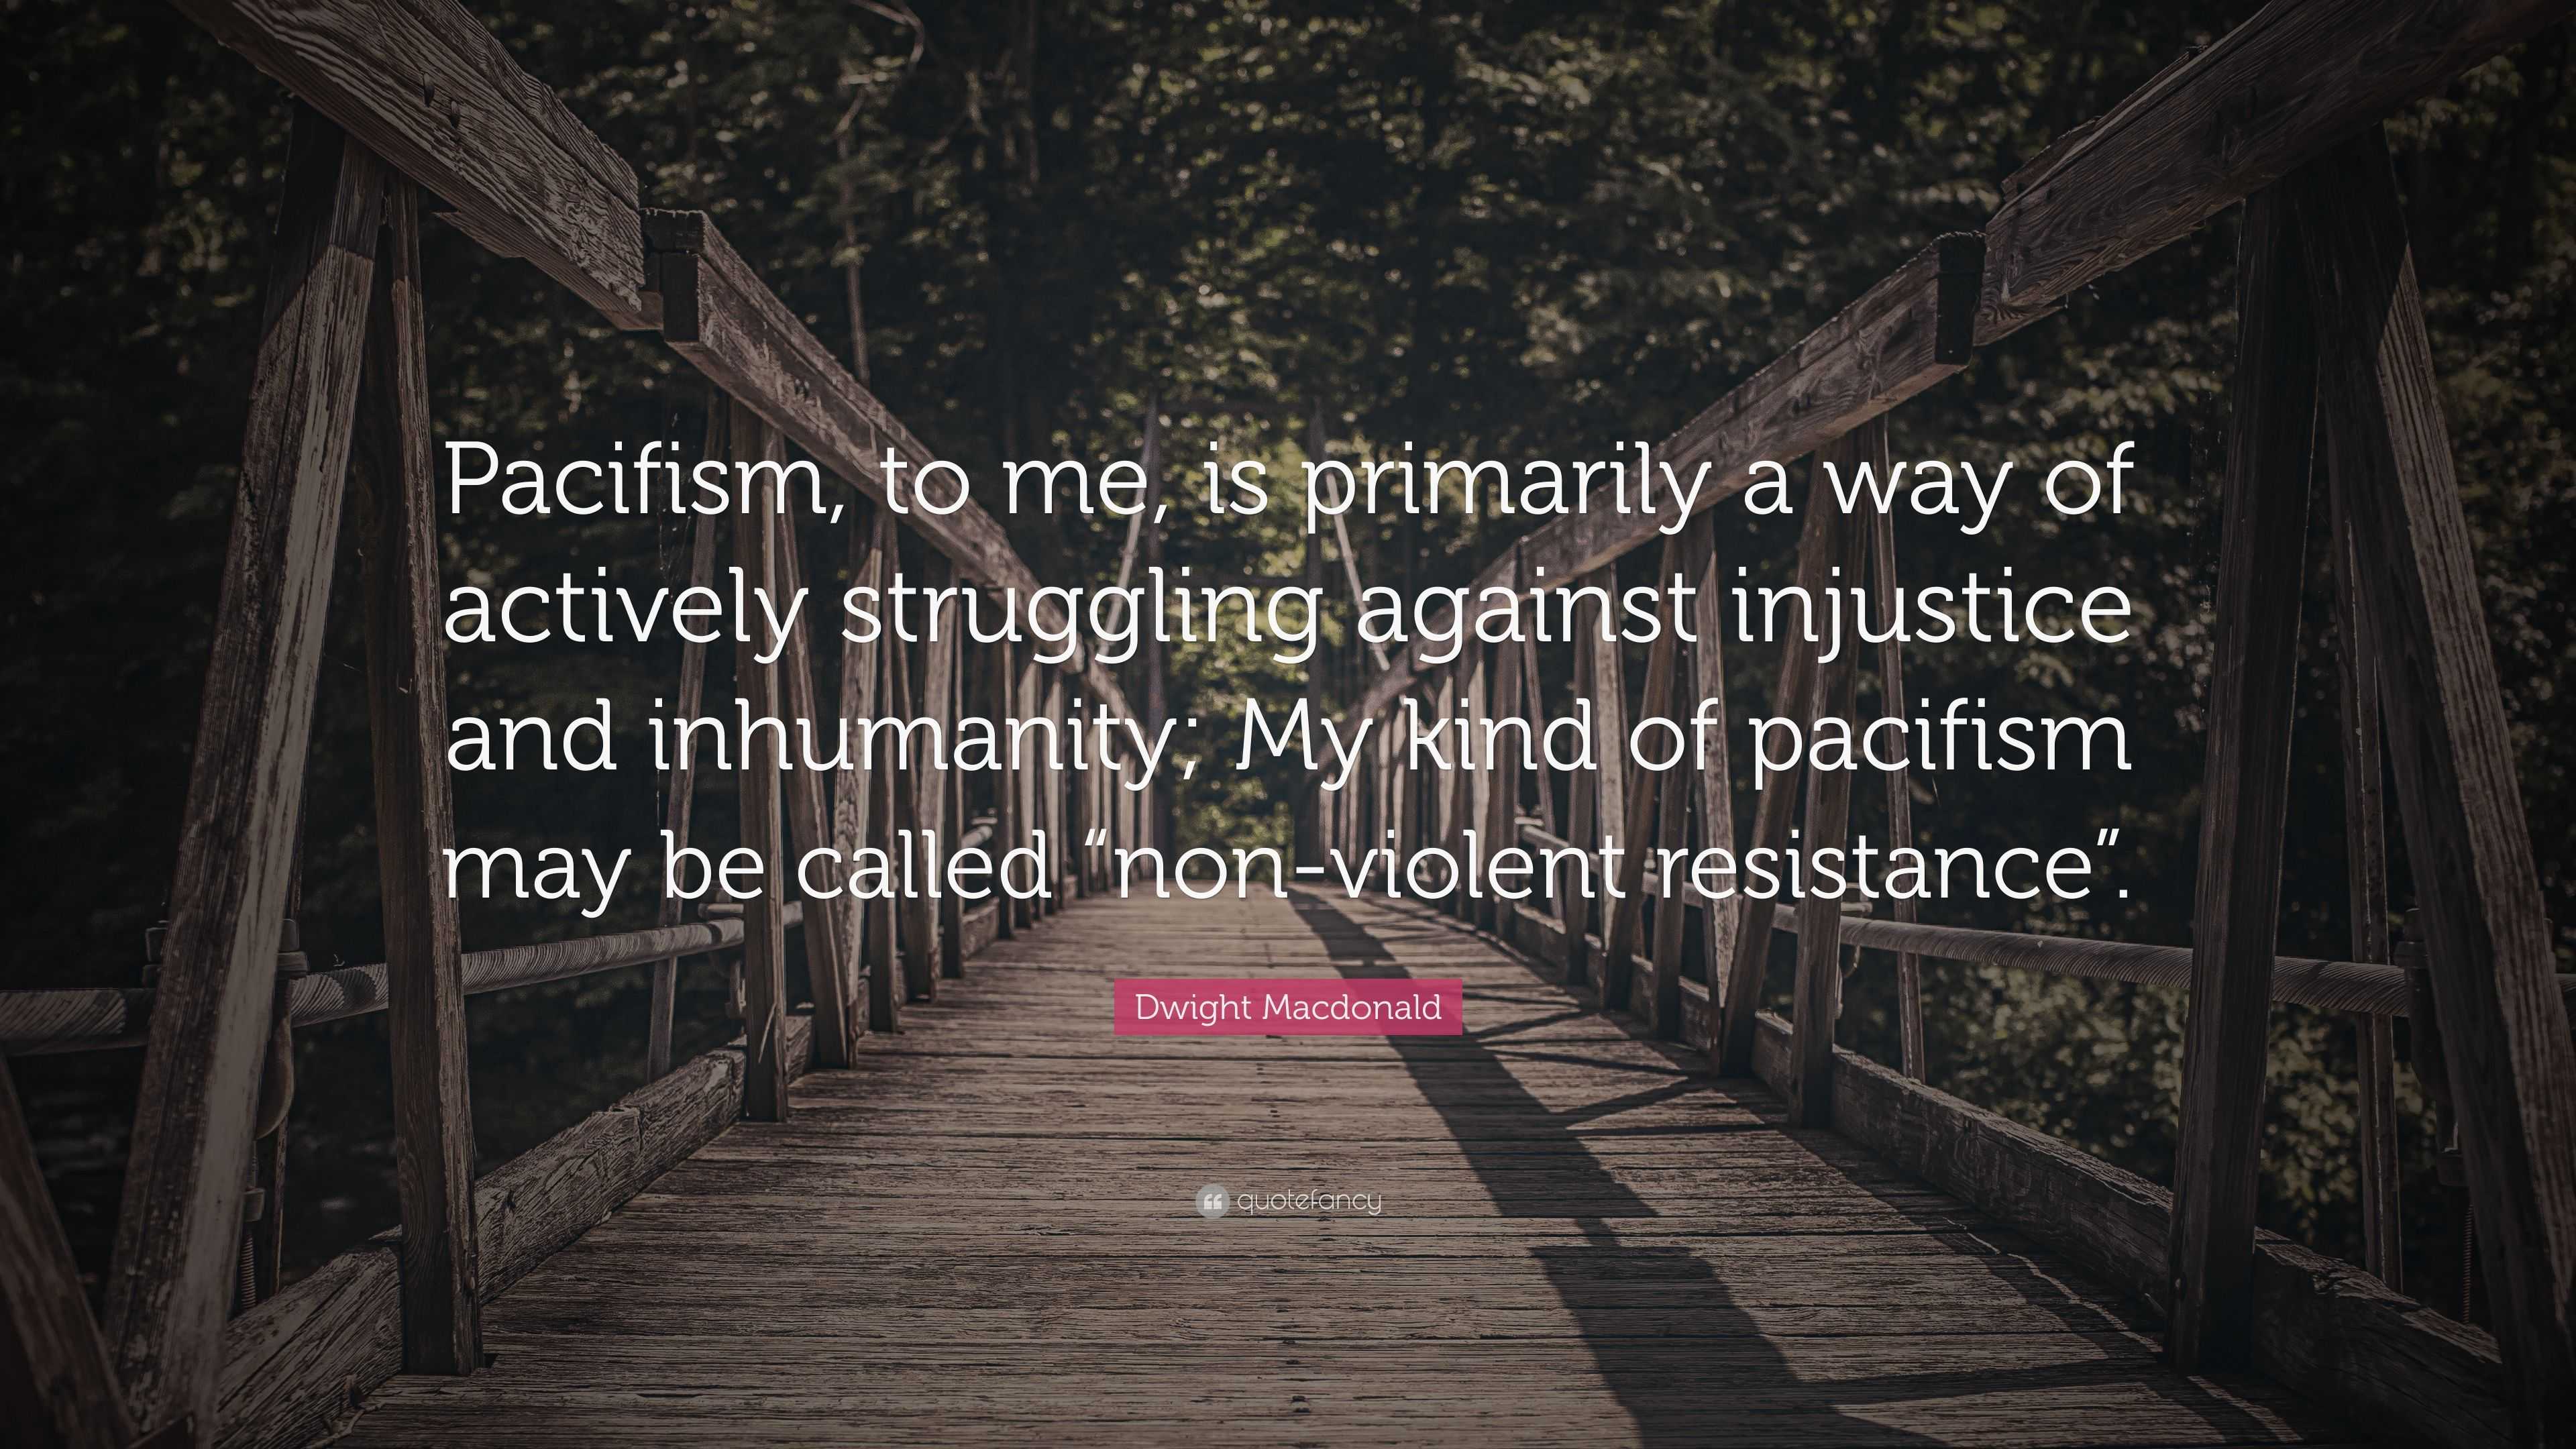 Dwight Macdonald Quote: "Pacifism, to me, is primarily a way of actively struggling against ...